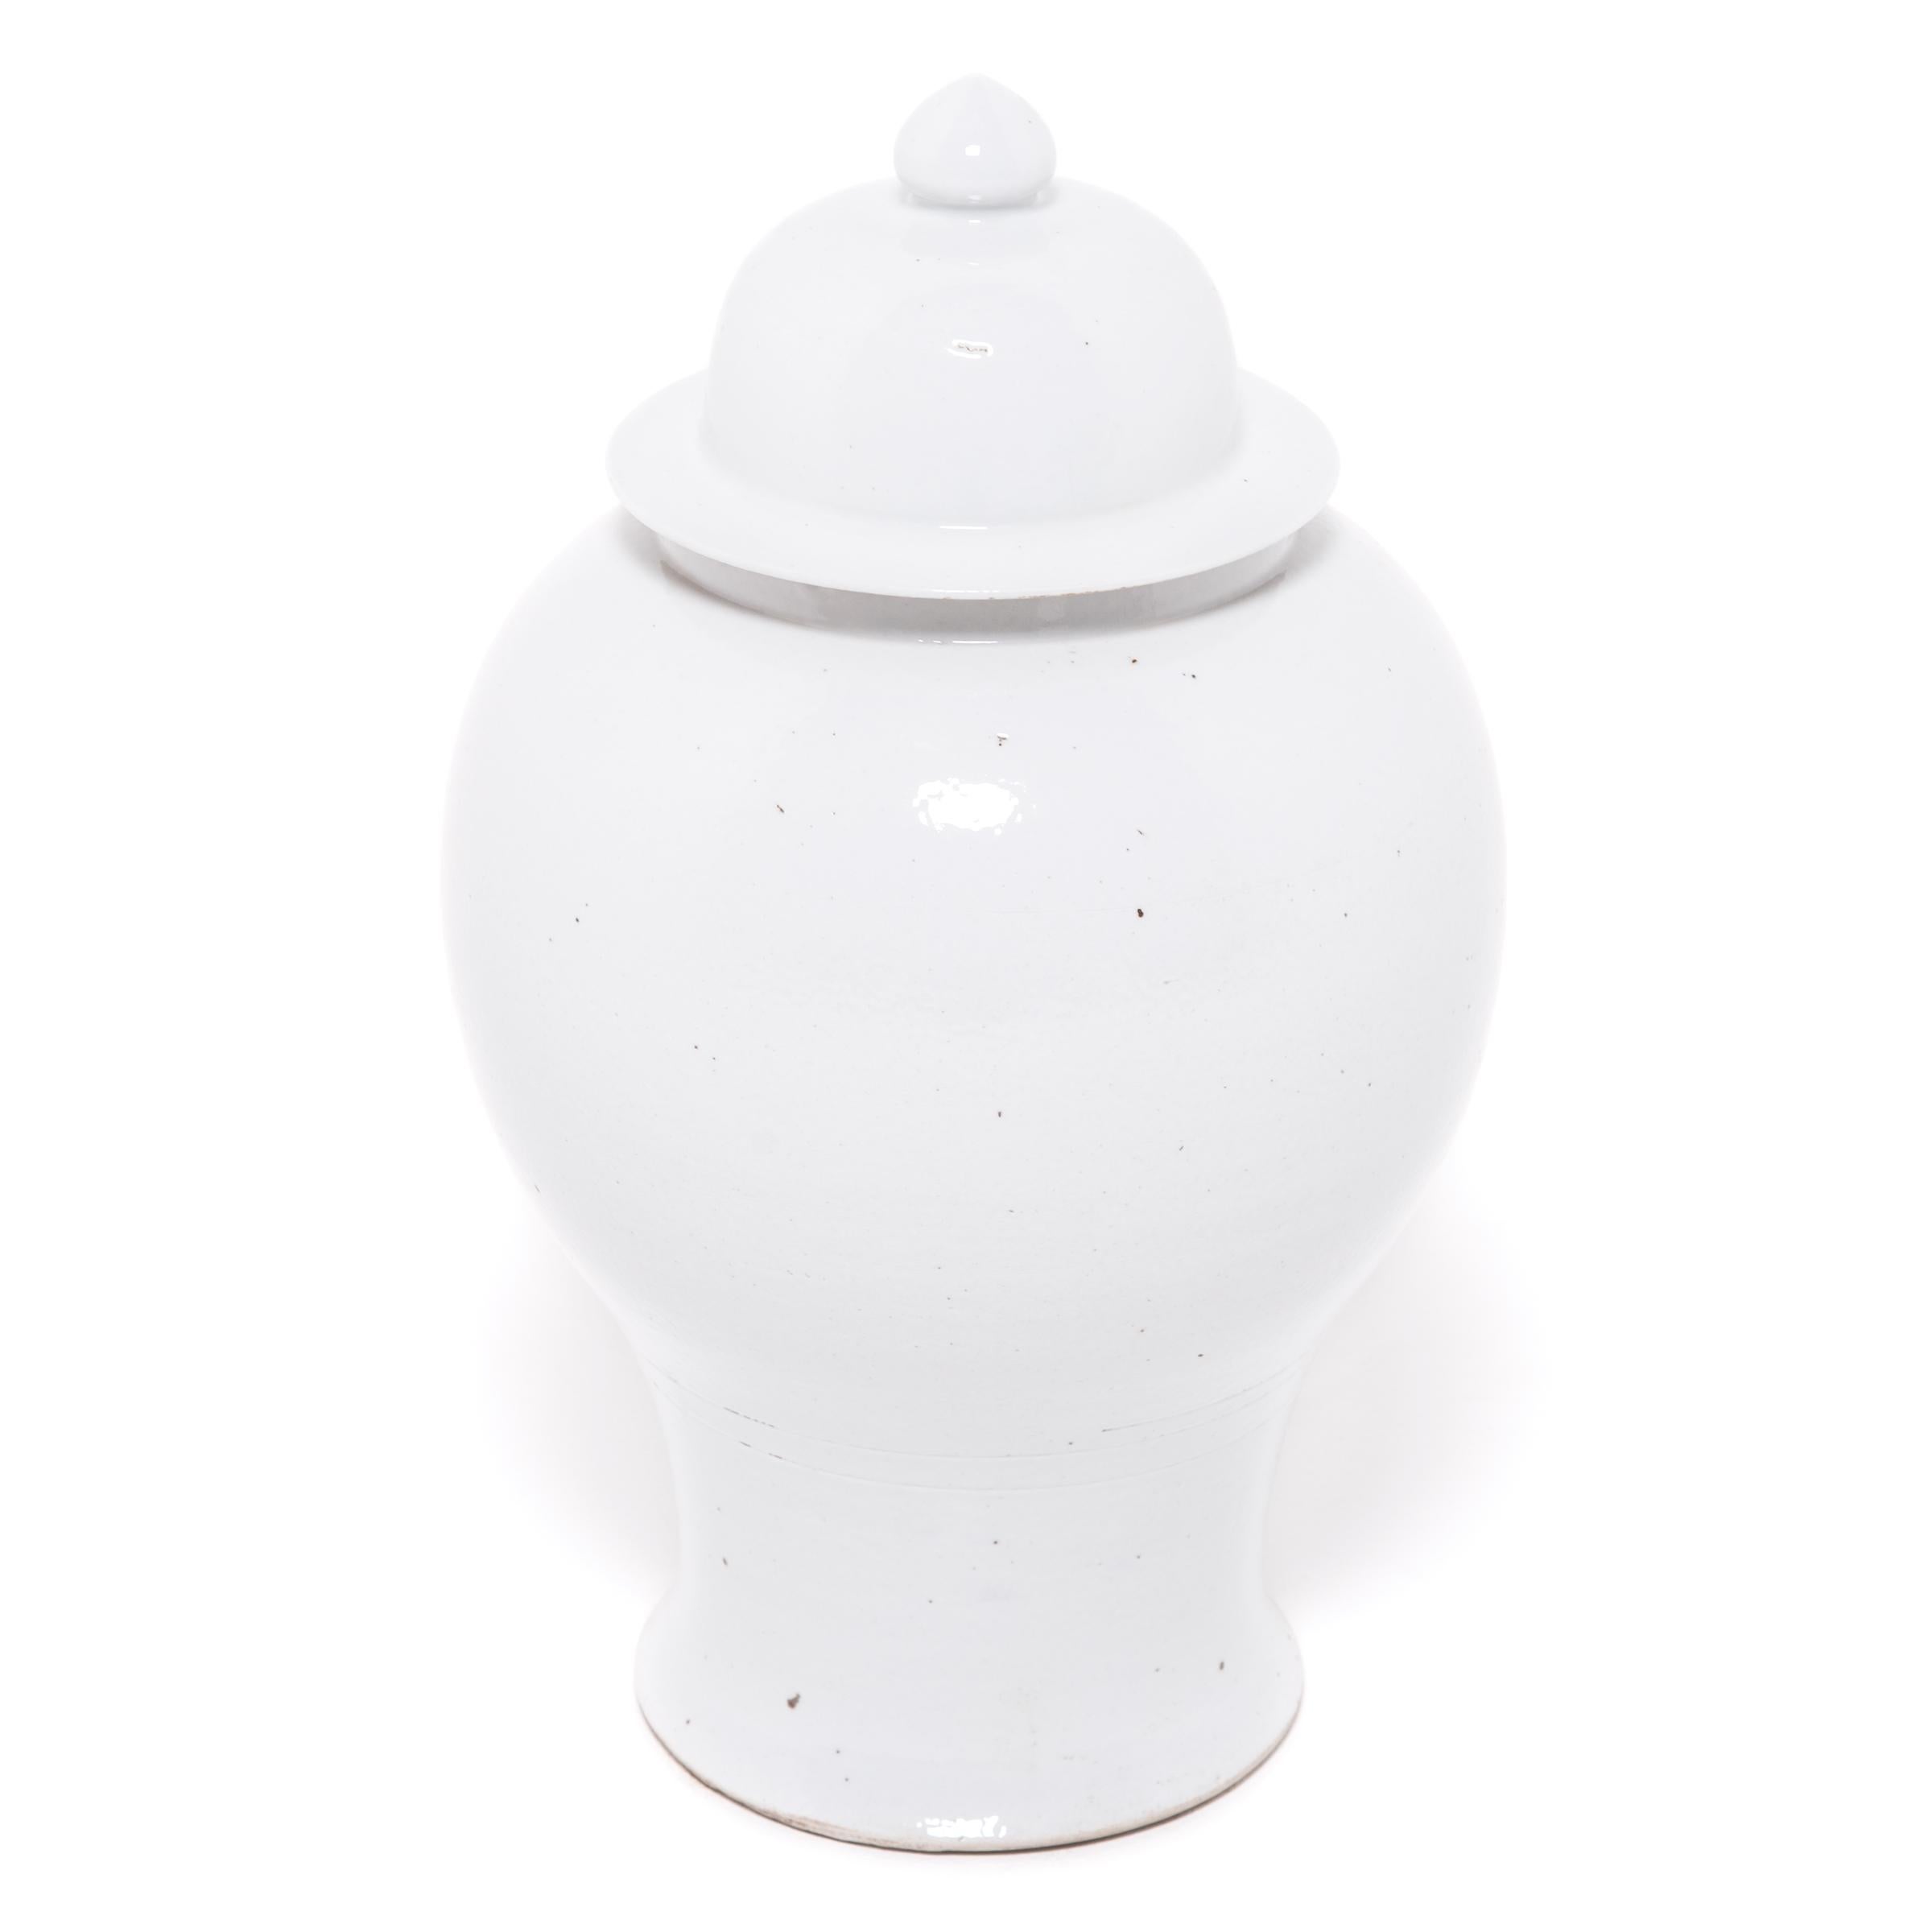 Defined by its rounded body, high shoulders and domed lid, the time-honored look of the Chinese baluster jar takes on a streamlined look in this contemporary interpretation made in Jiangxi province. Traditionally elaborately decorated, this modern